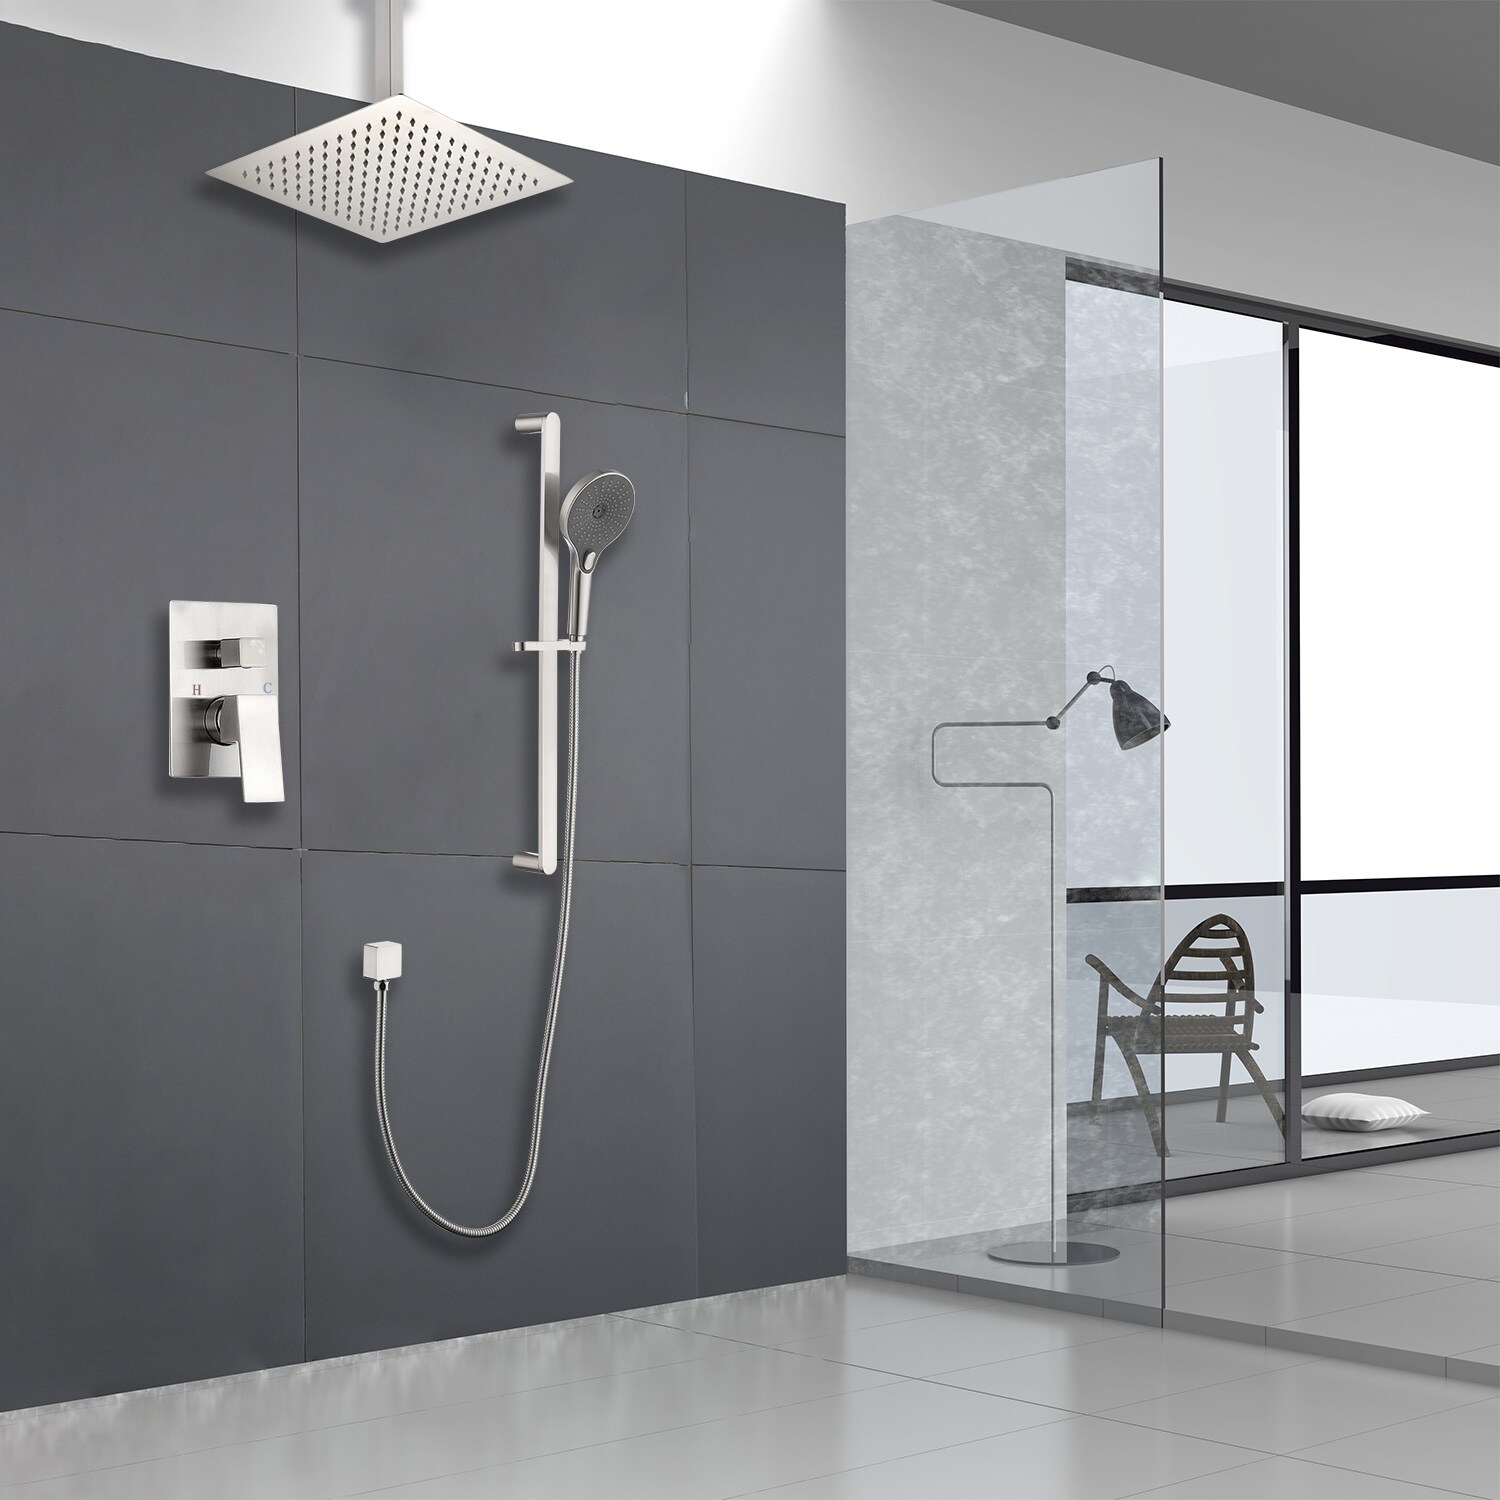 https://ak1.ostkcdn.com/images/products/is/images/direct/b134765a3e25b55945a31b60bc1e2e03061338a7/Rainfall-Shower-Head-Complete-Shower-System-with-Rough-in-Valve.jpg